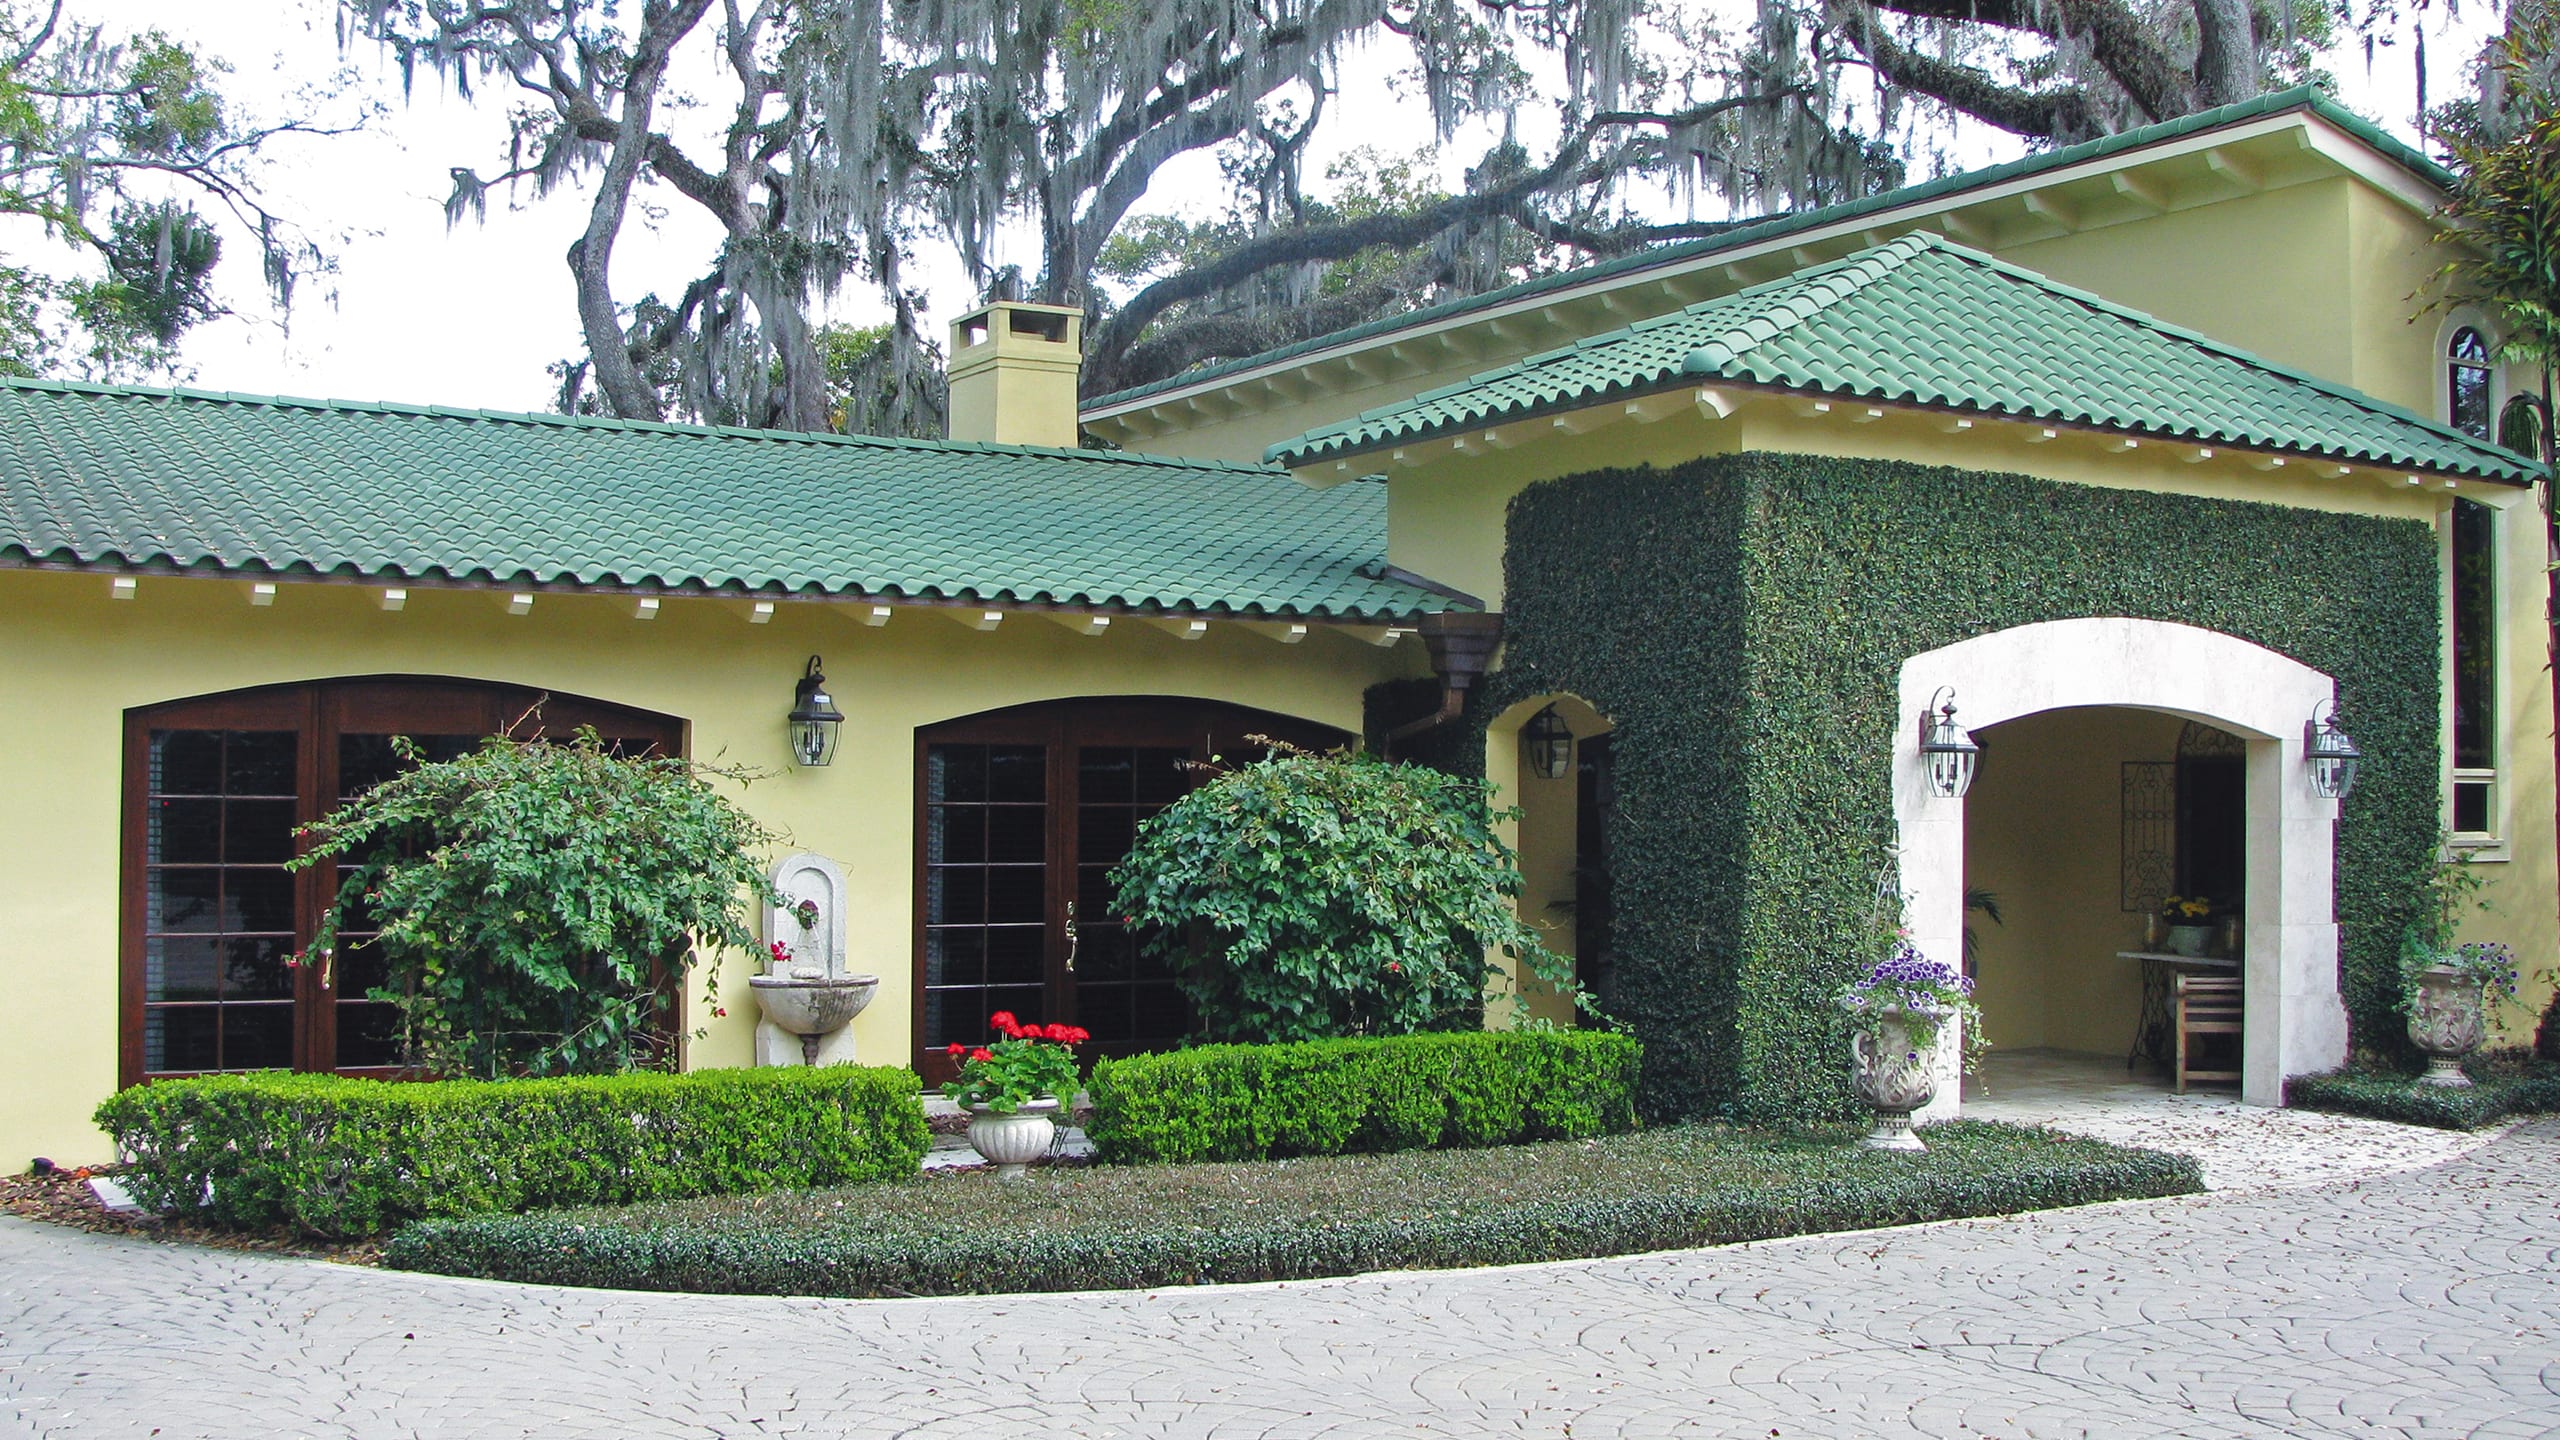 Private Residence - Winter Park Ludowici Roof Tile